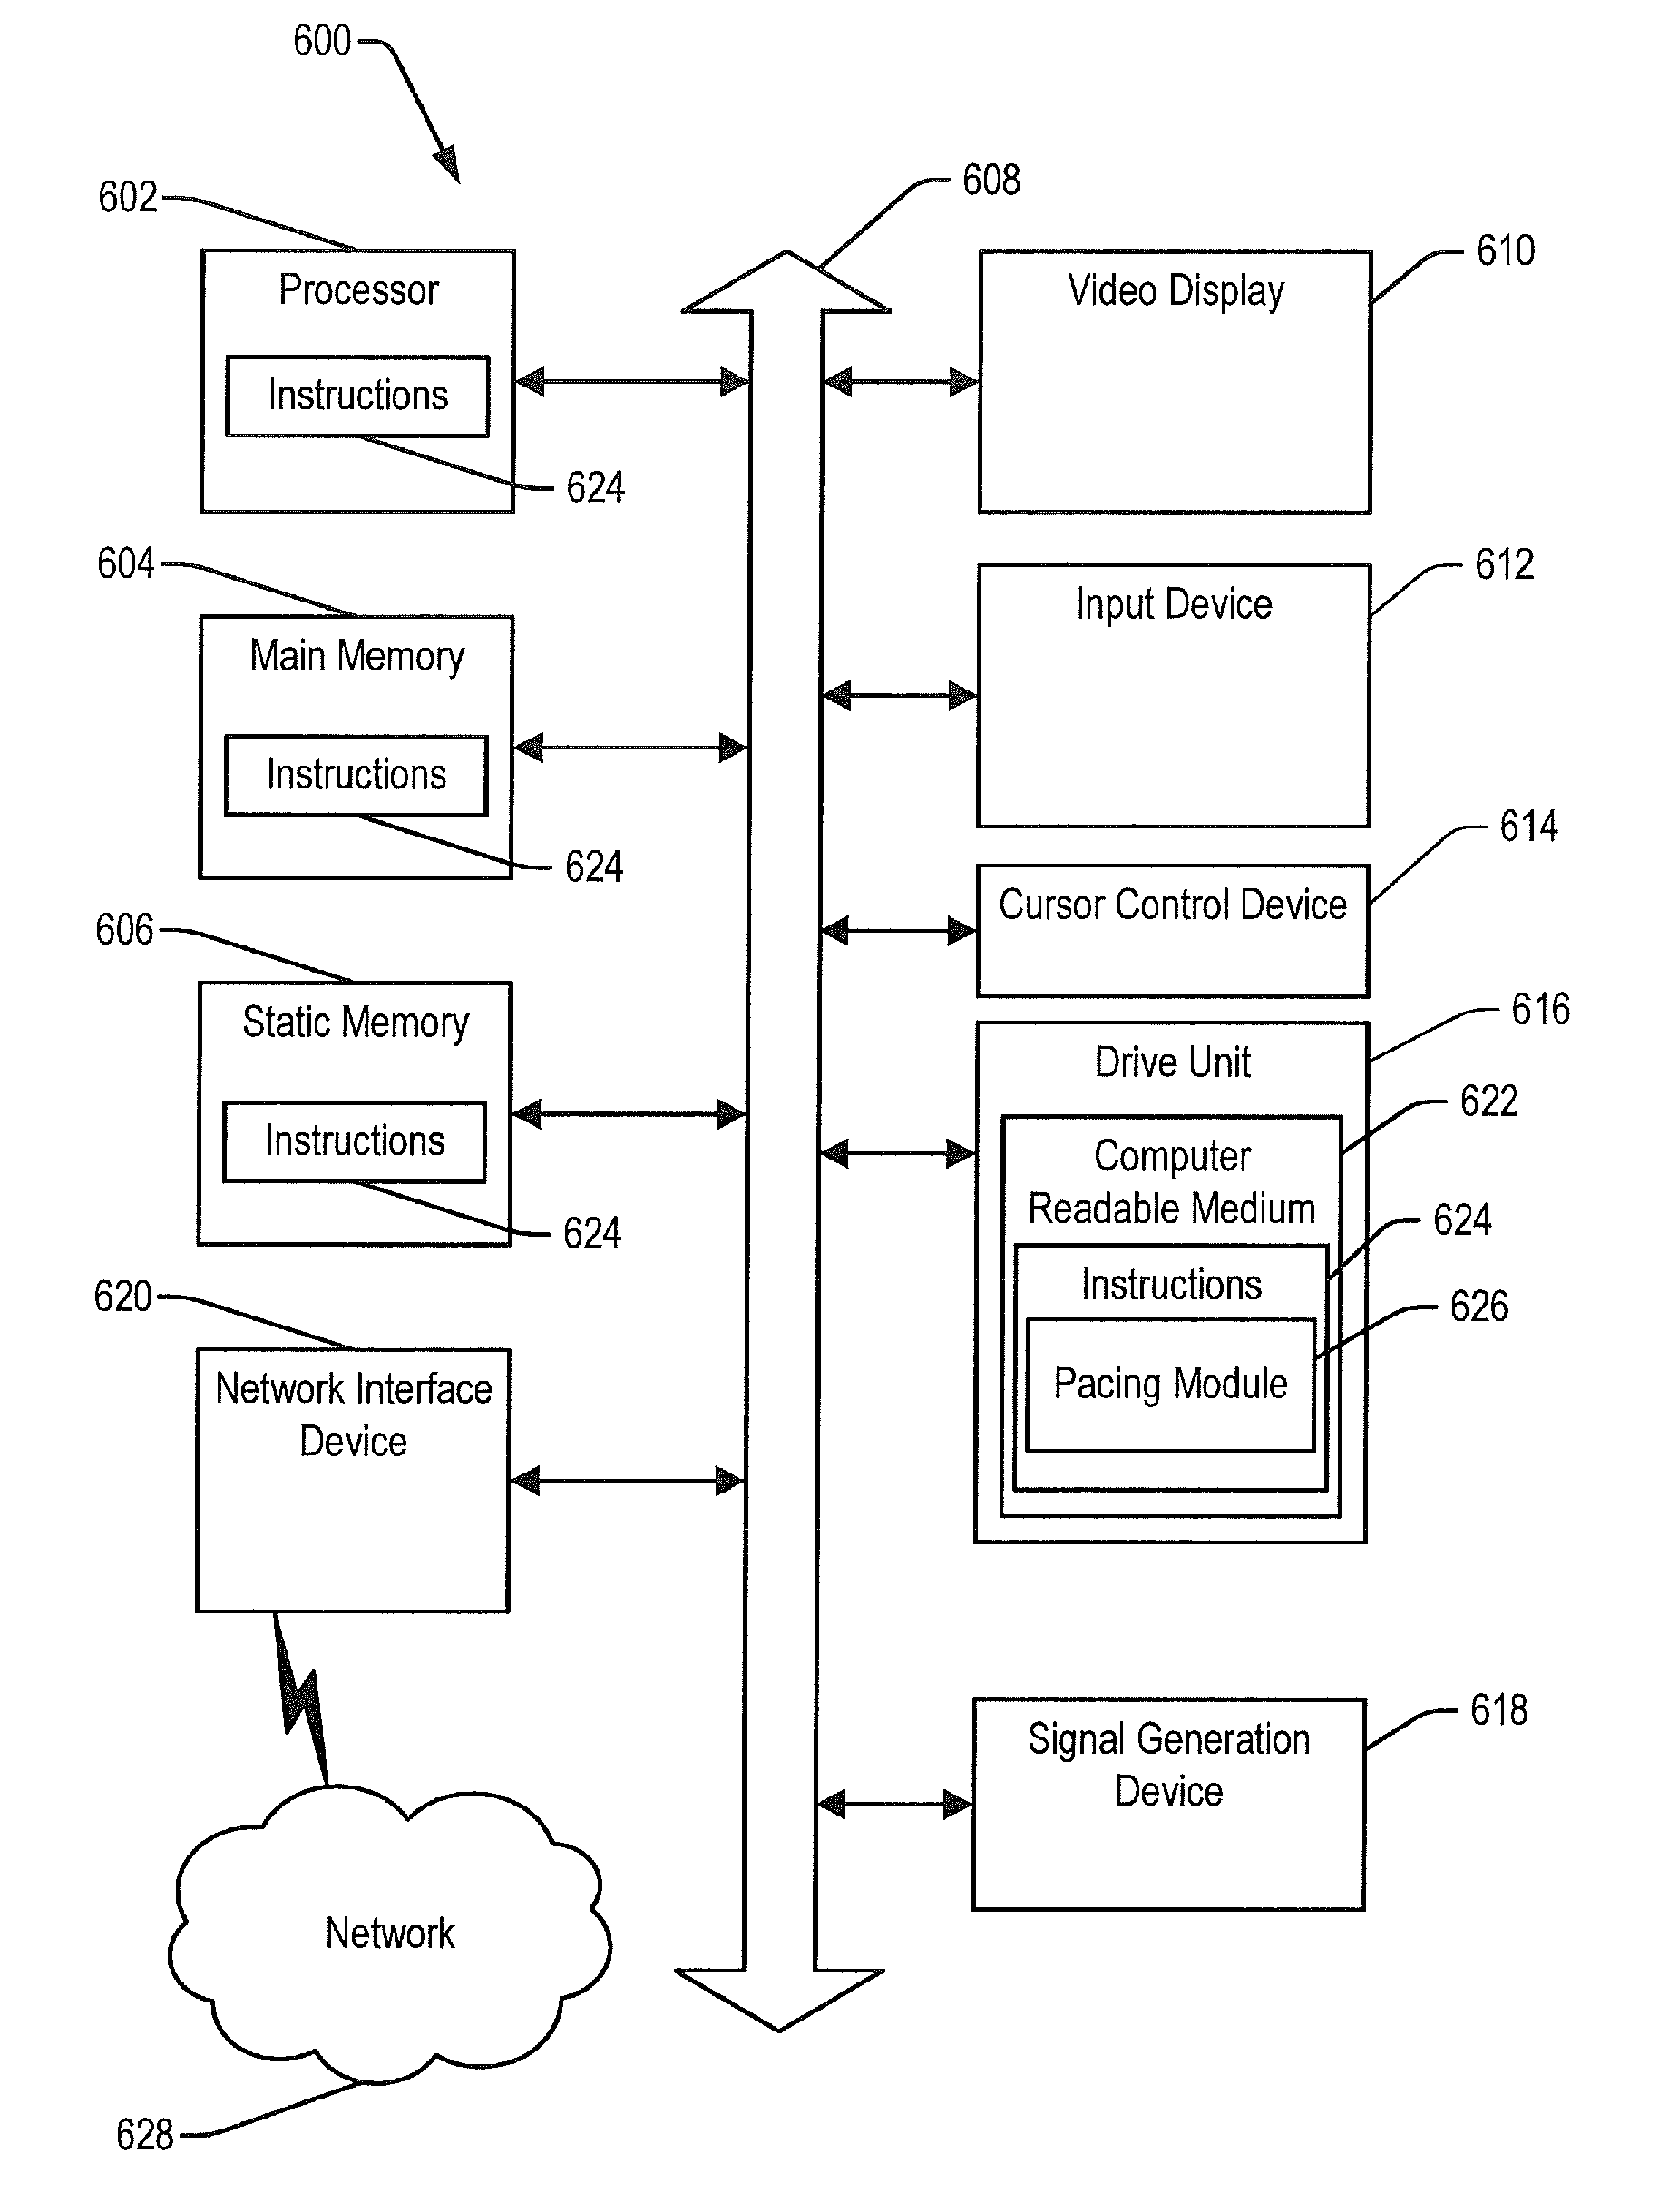 Adaptive Pacing of Media Content Delivery Over a Wireless Network